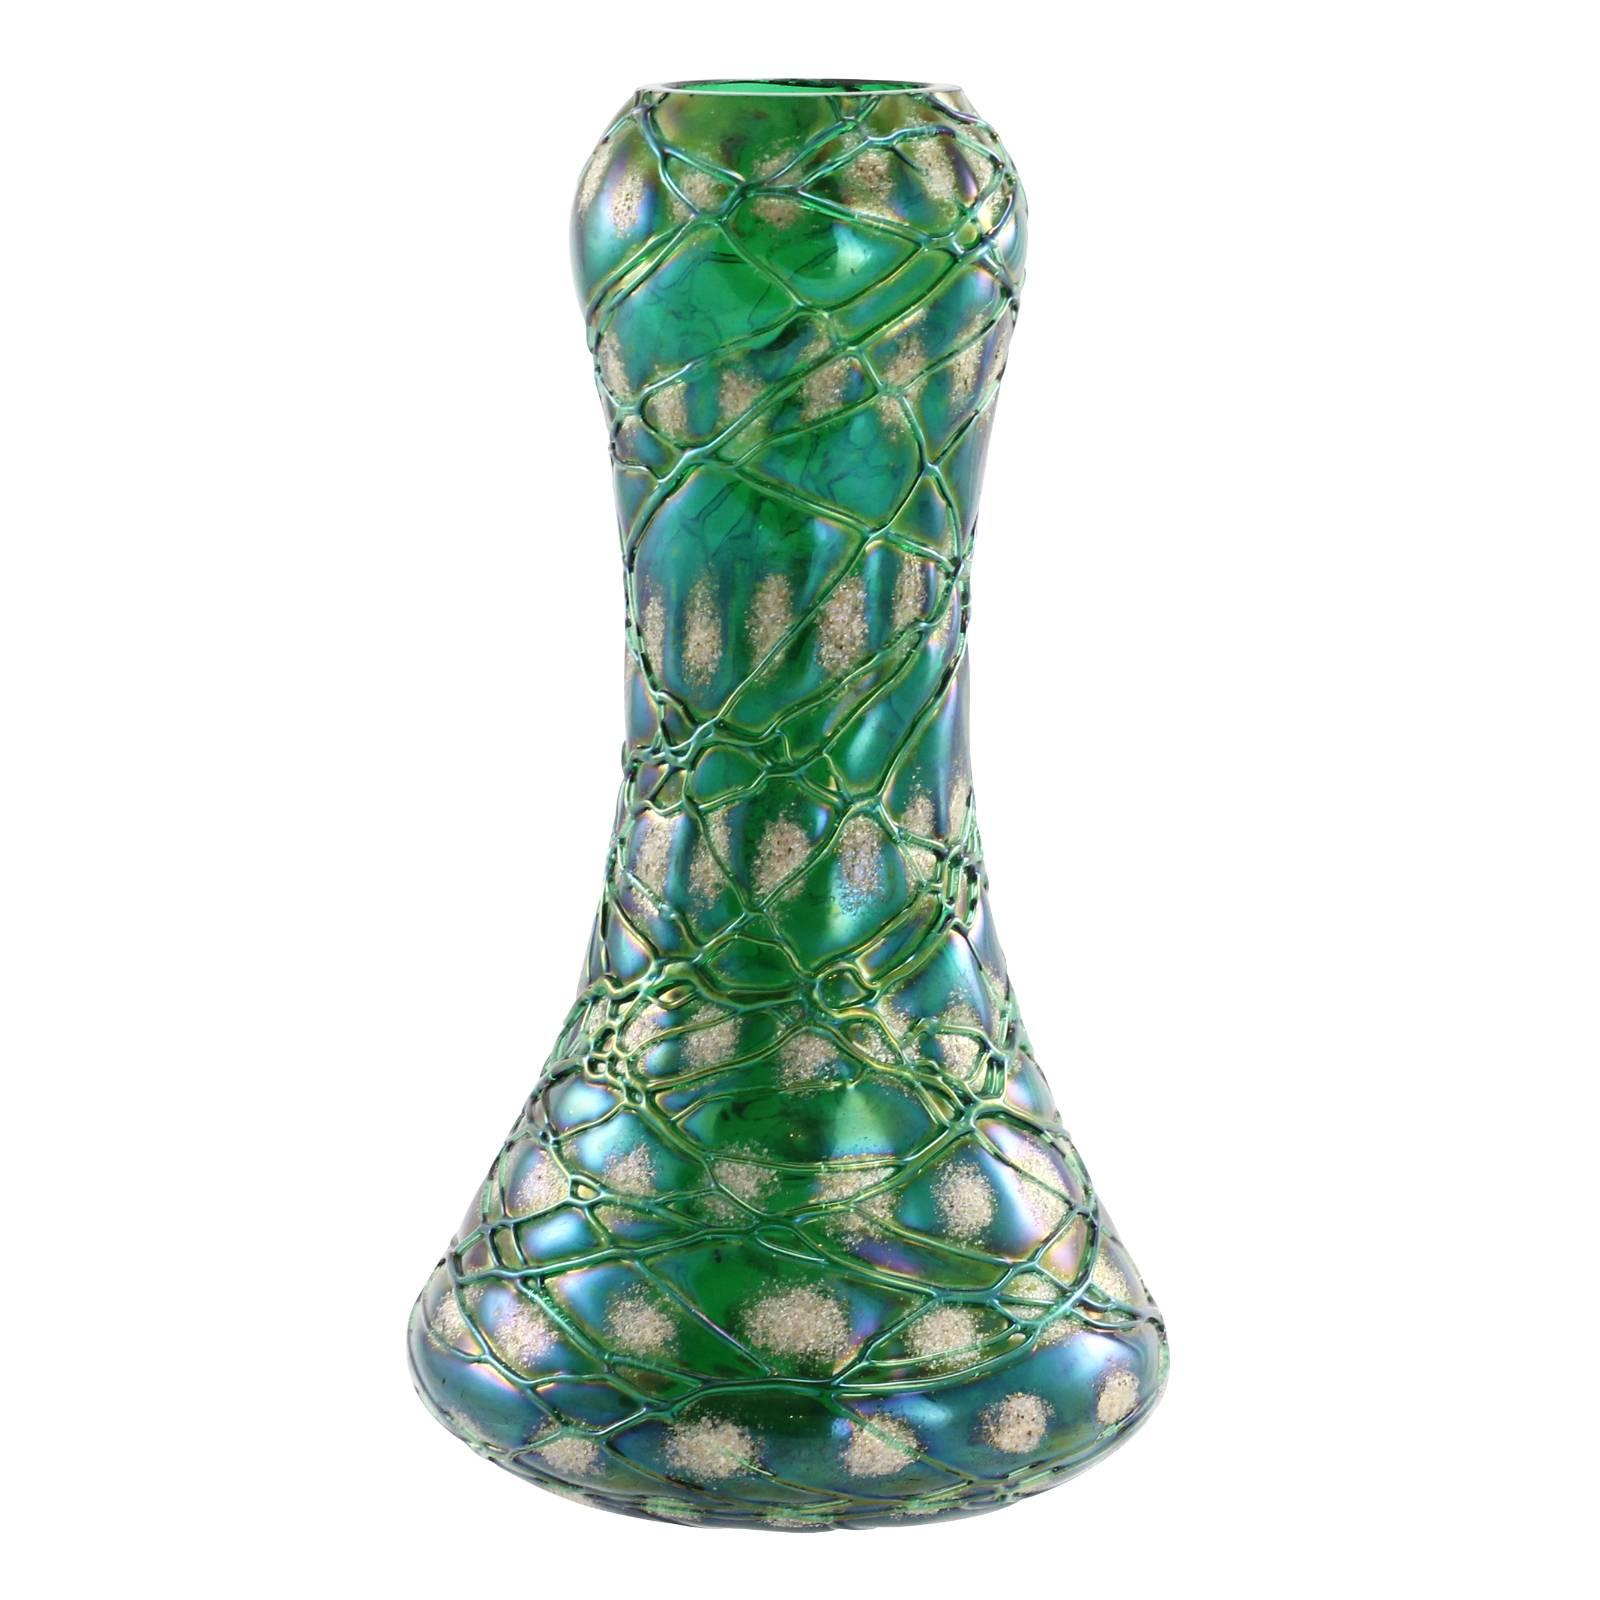 A turn of the century Bohemian Art Nouveau glass vase in the 'Snowflake' decor by Kralik. With an iridescent dark green ground, and fine crisscrossed threading, this vase has been completed with the addition of white frit 'snowflakes.'